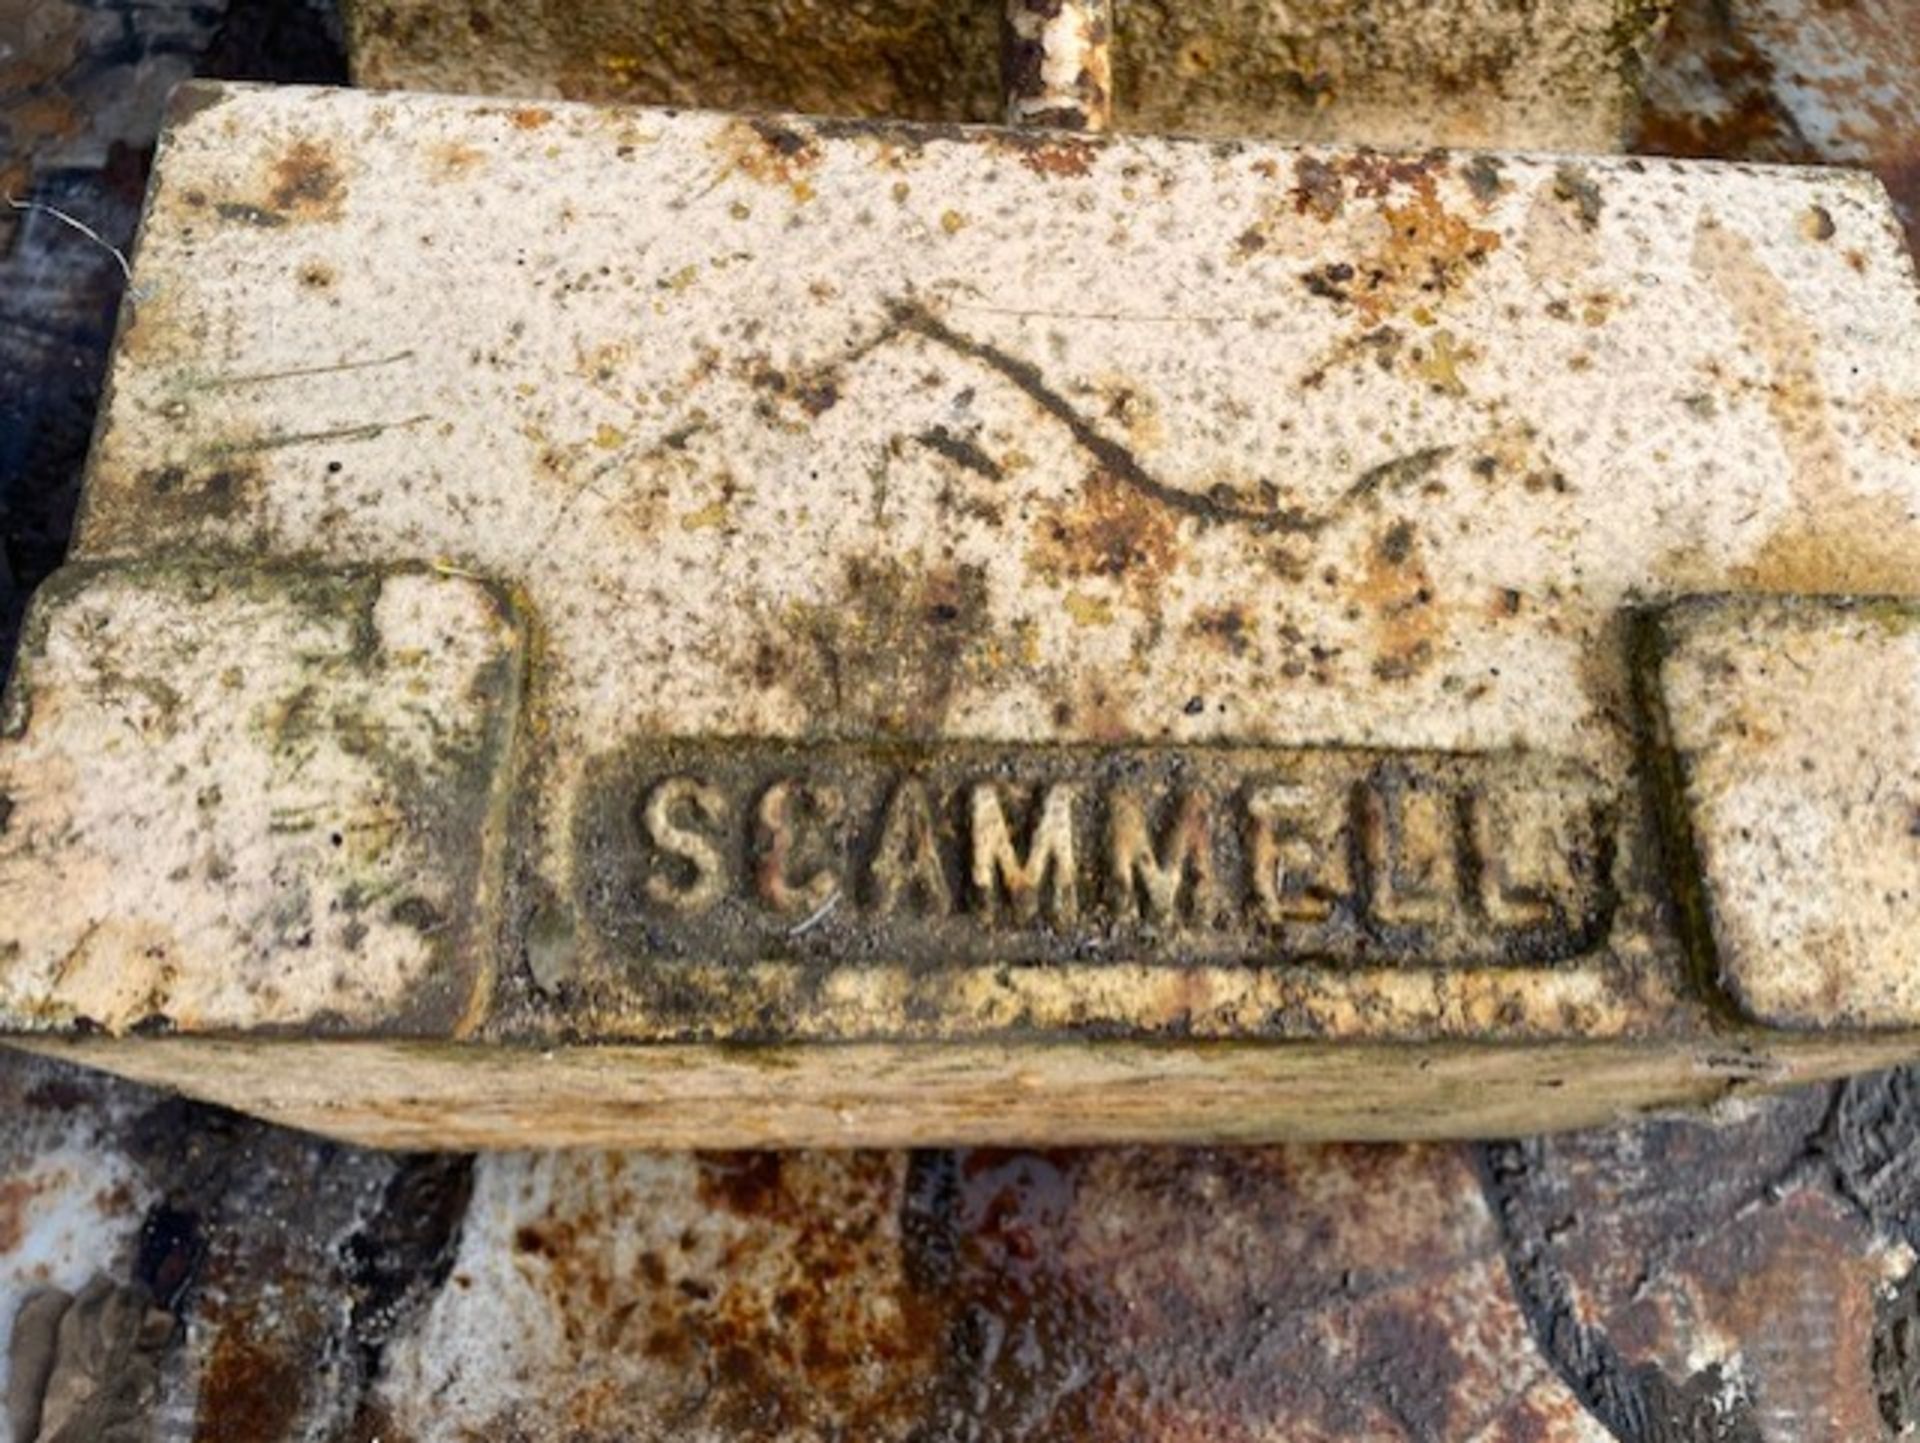 Very Rare and Unusual Scammell Vehicle Weight Block with name - Image 2 of 2